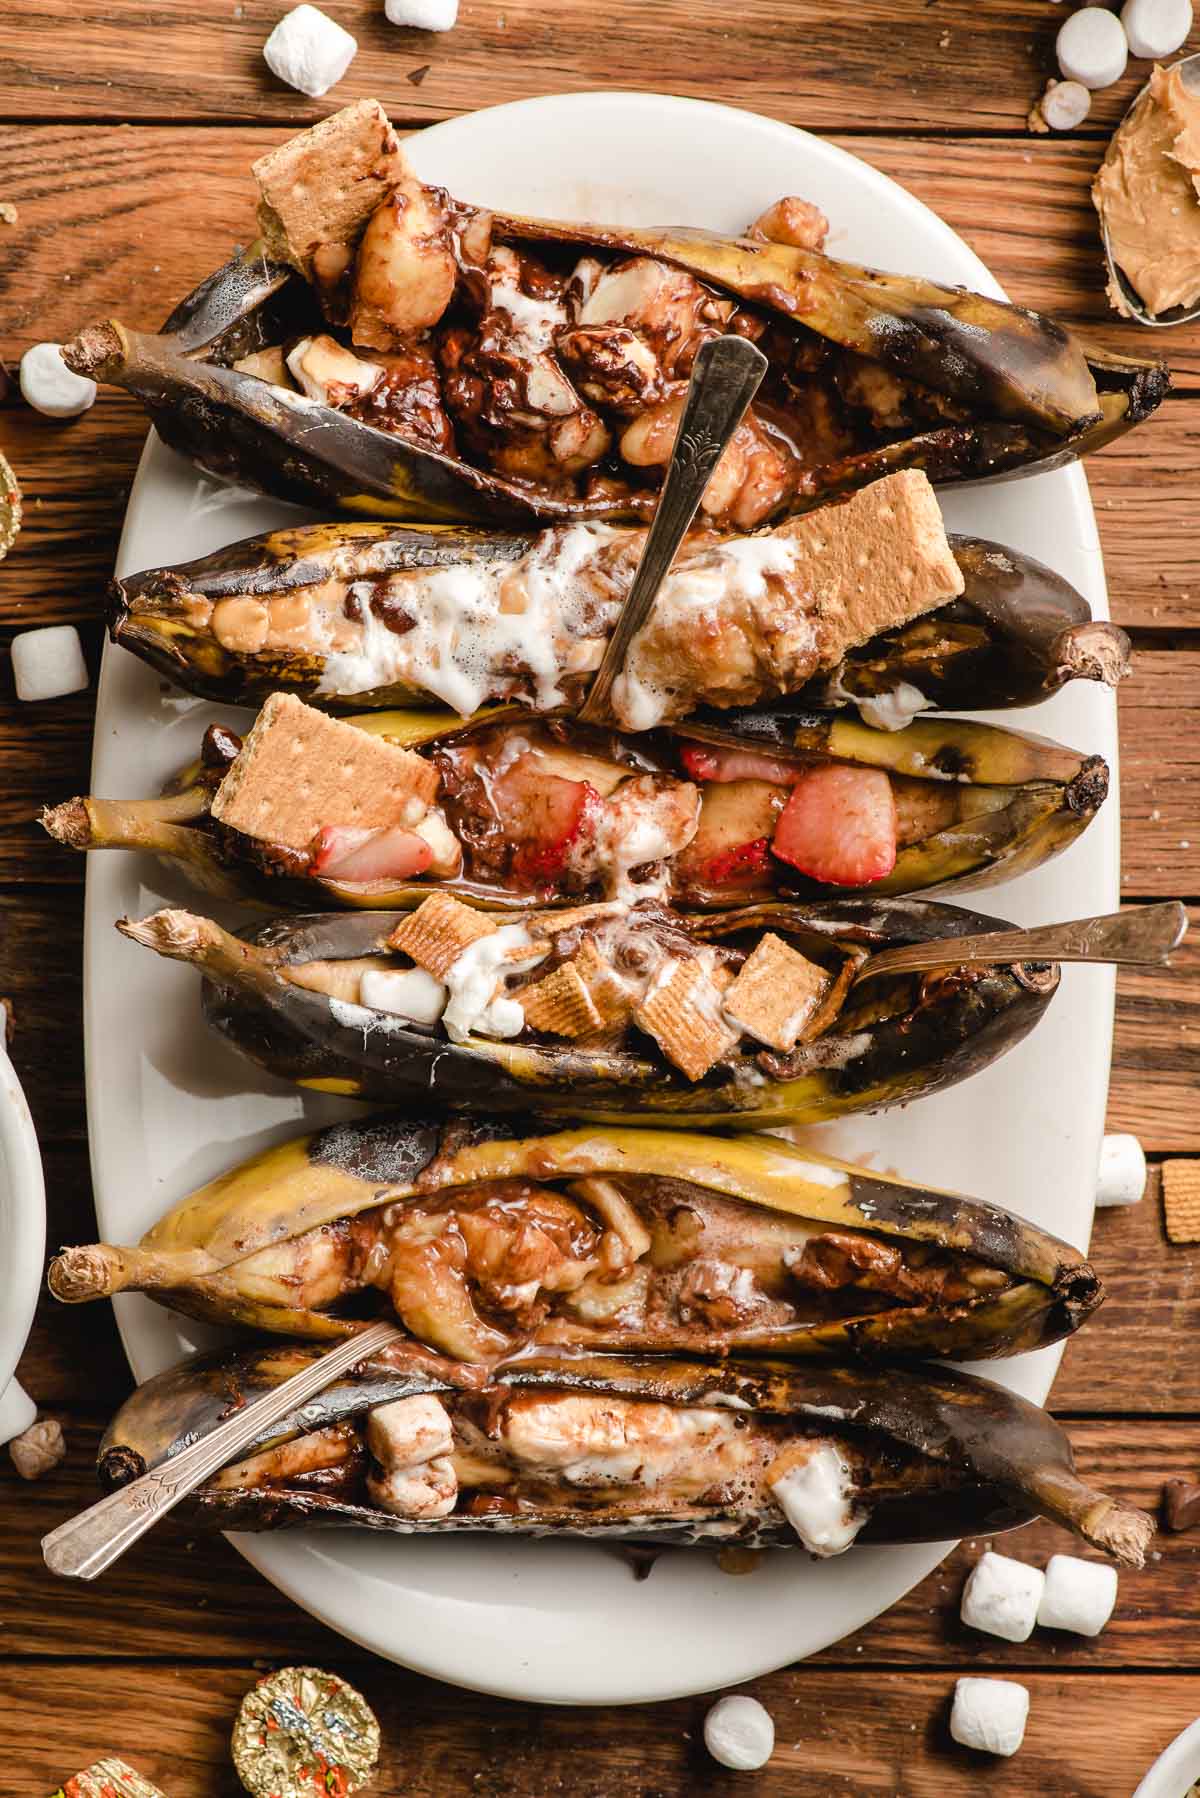 Six campfire banana boats, each stuffed with different toppings, inclduing chocoalte chips, strawberries, marshmallows, and graham crackers.